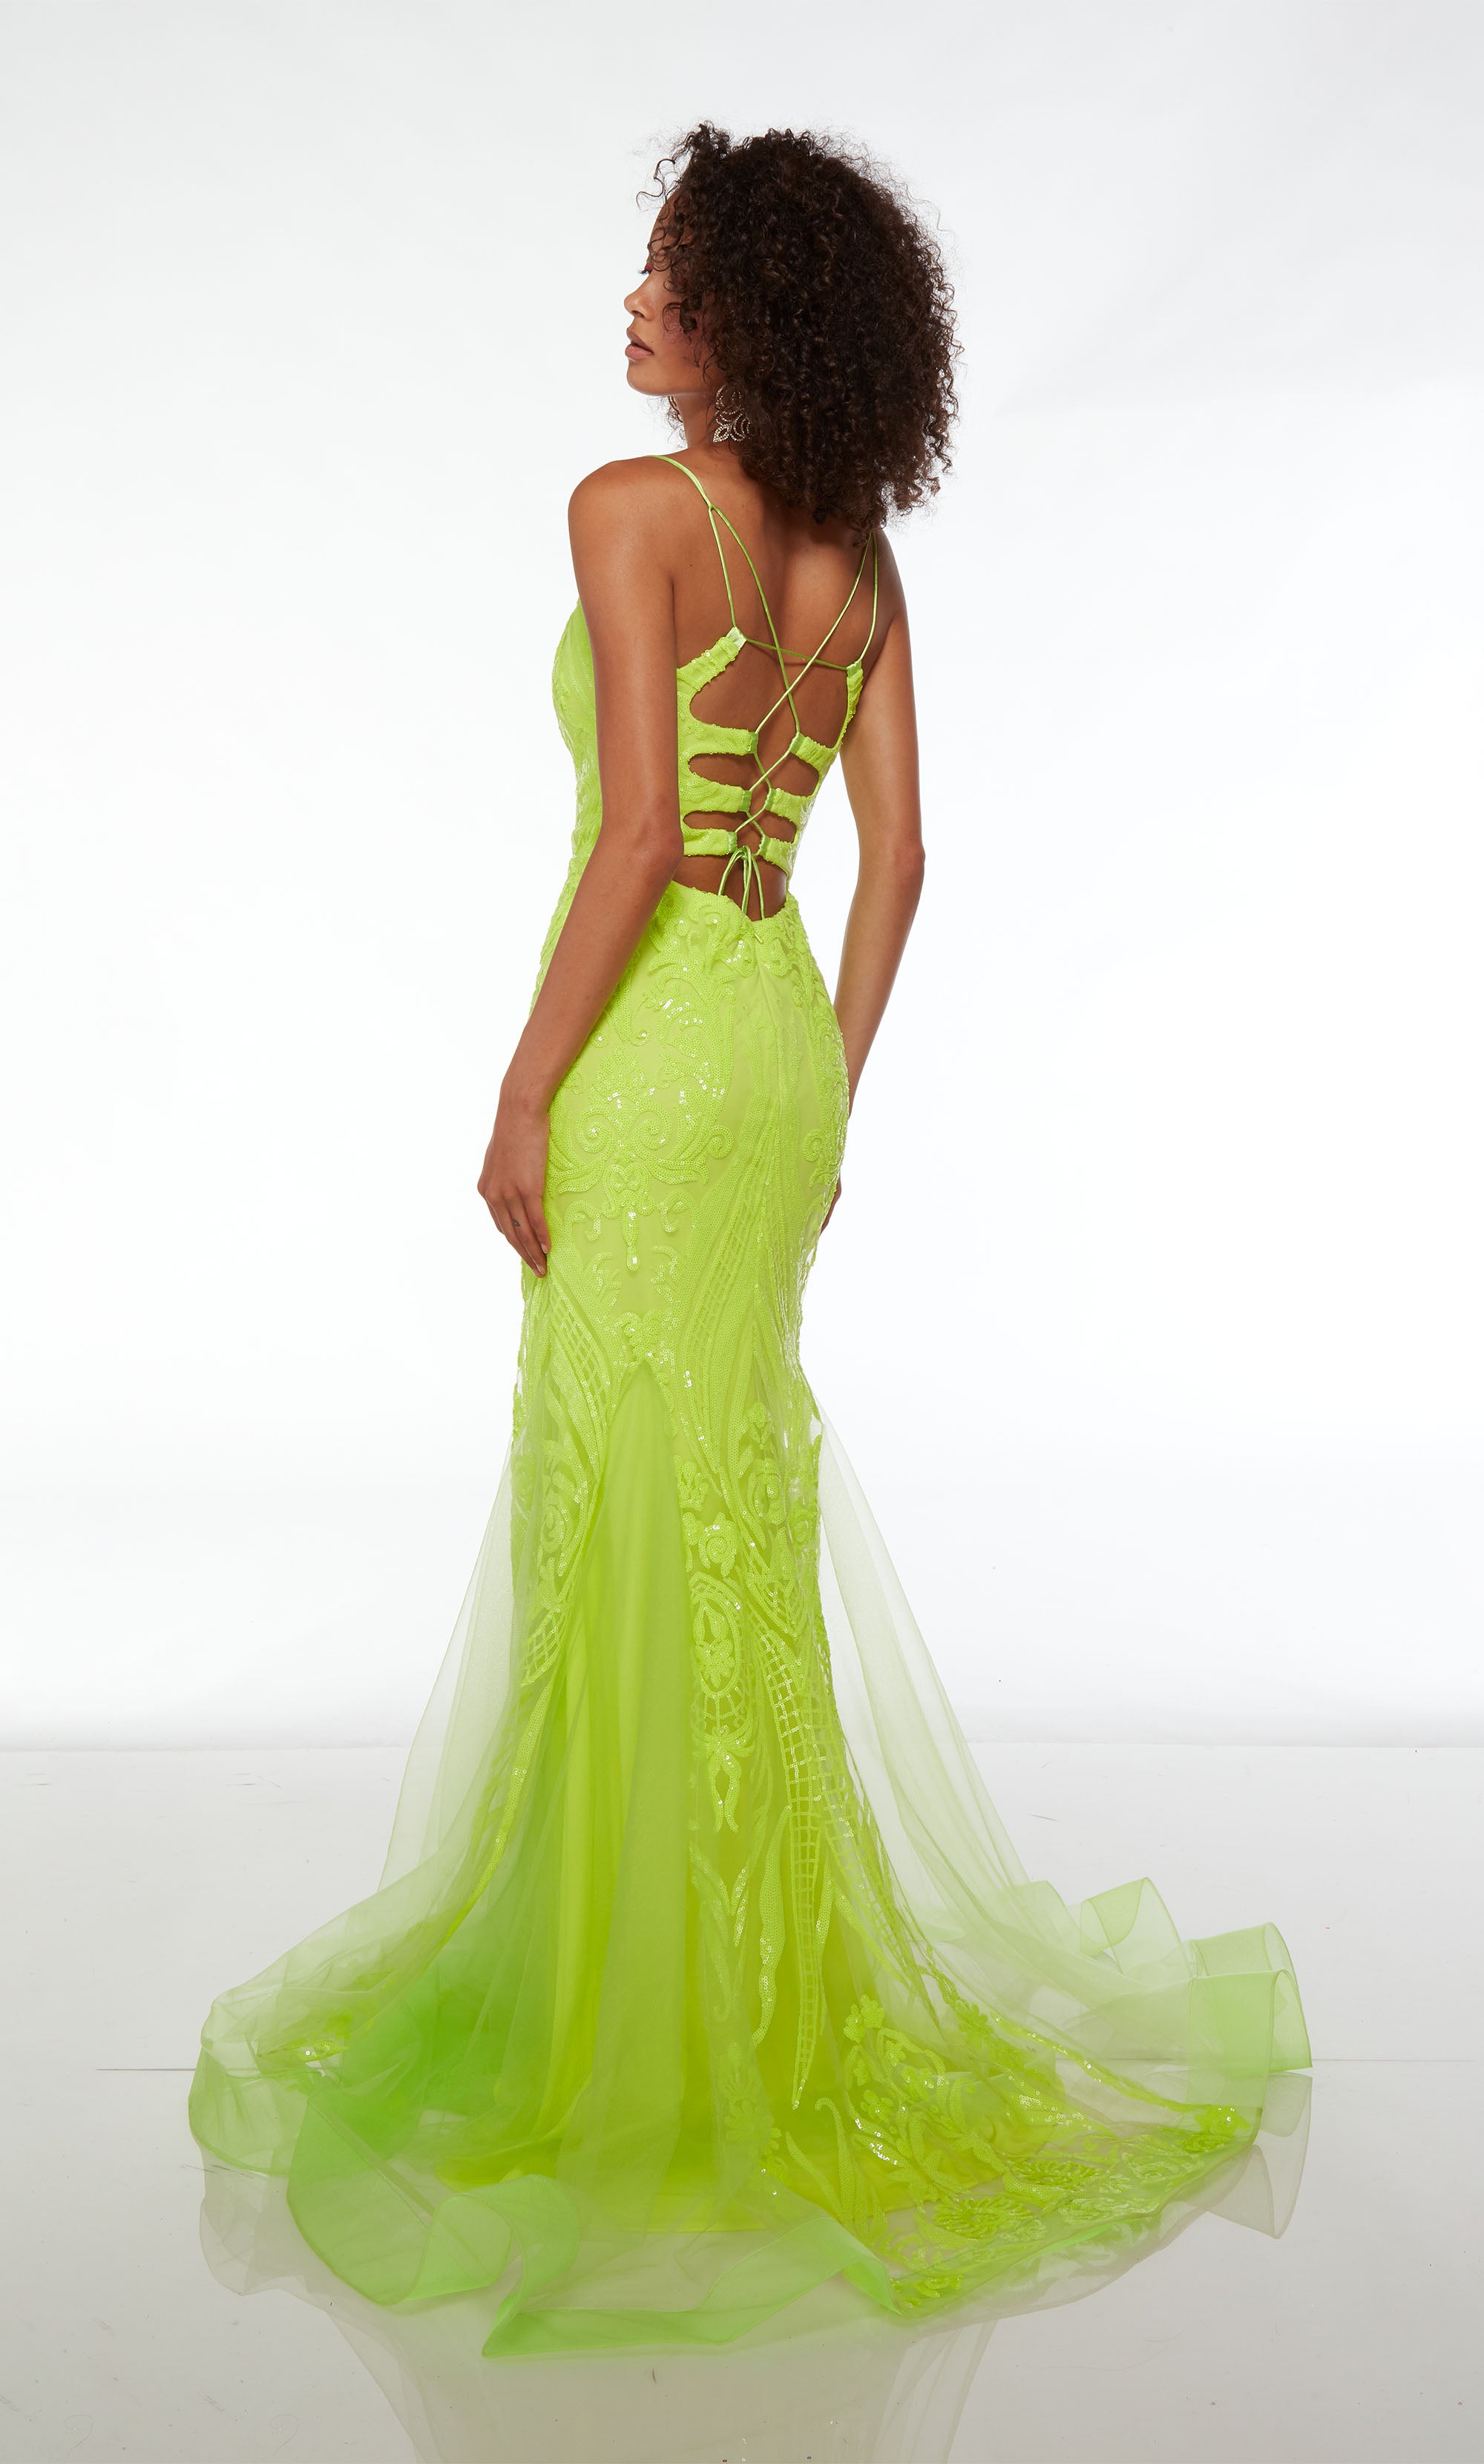 Fitted plunging green prom dress with an lace-up back, fit-and-flare tulle skirt, and paisley sequin design throughout for an stylish and captivating look.